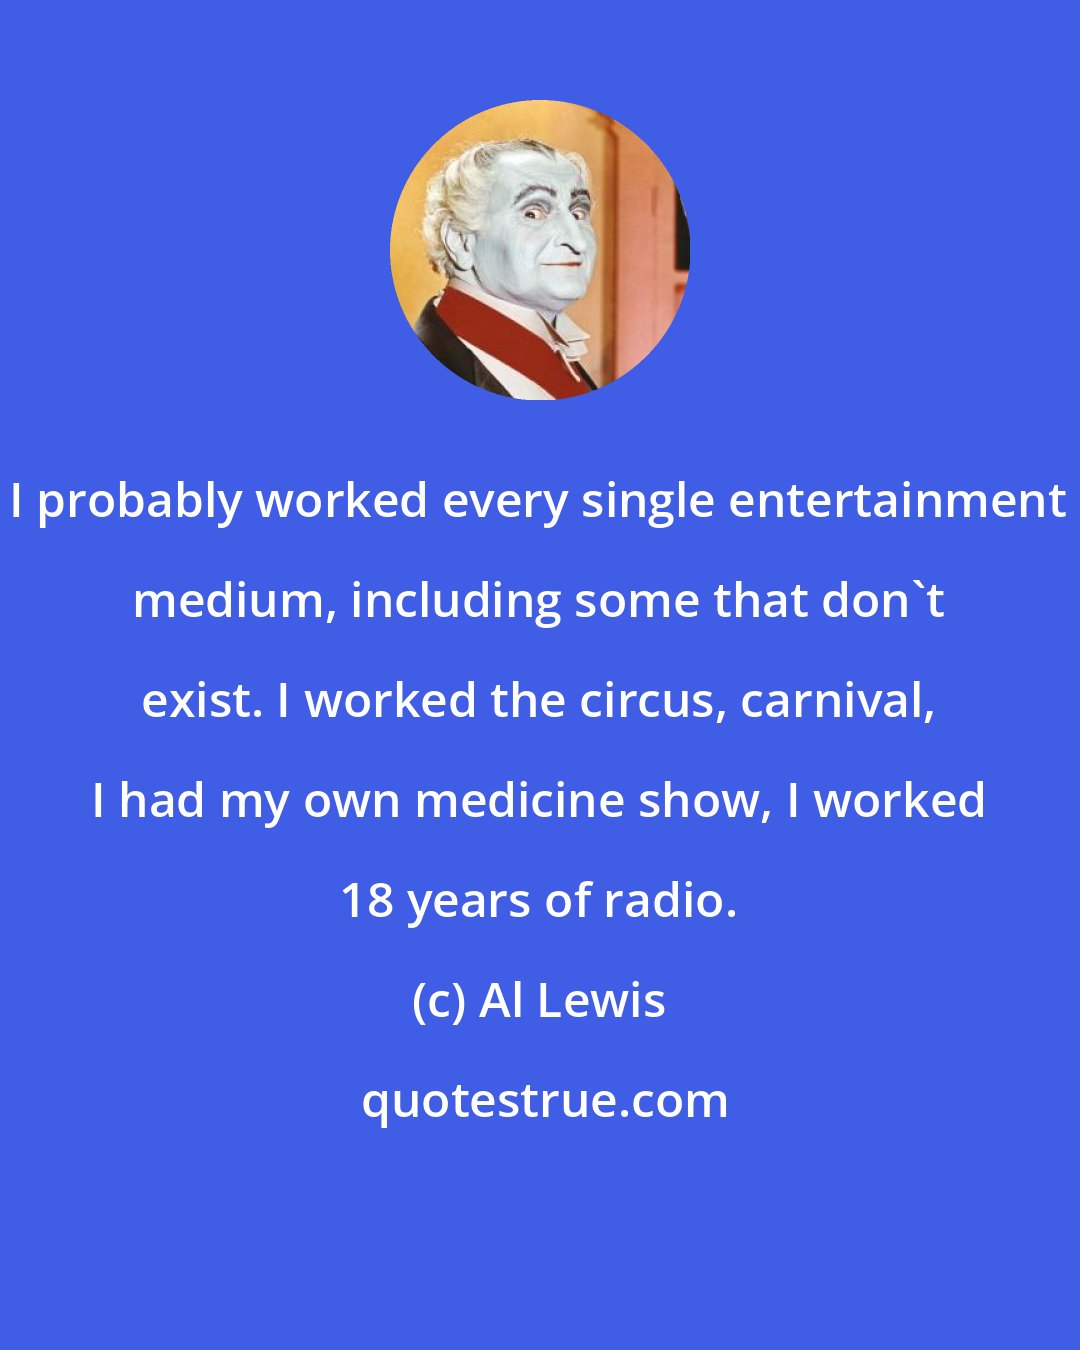 Al Lewis: I probably worked every single entertainment medium, including some that don't exist. I worked the circus, carnival, I had my own medicine show, I worked 18 years of radio.